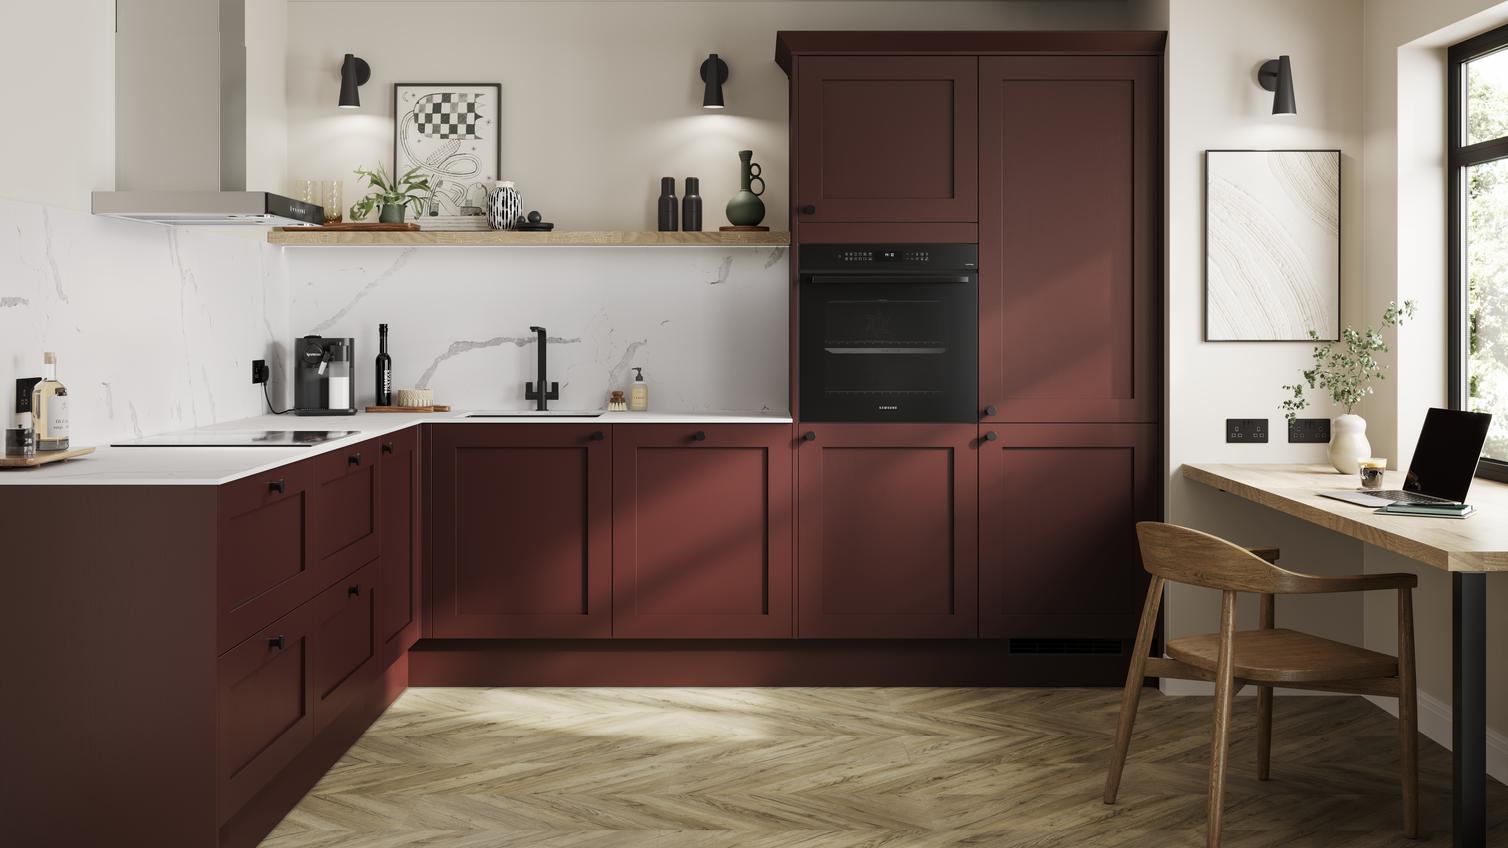 A garnet red shaker kitchen in an L-shaped layout. There are white worktops, oak laminate flooring and undermounted sink.